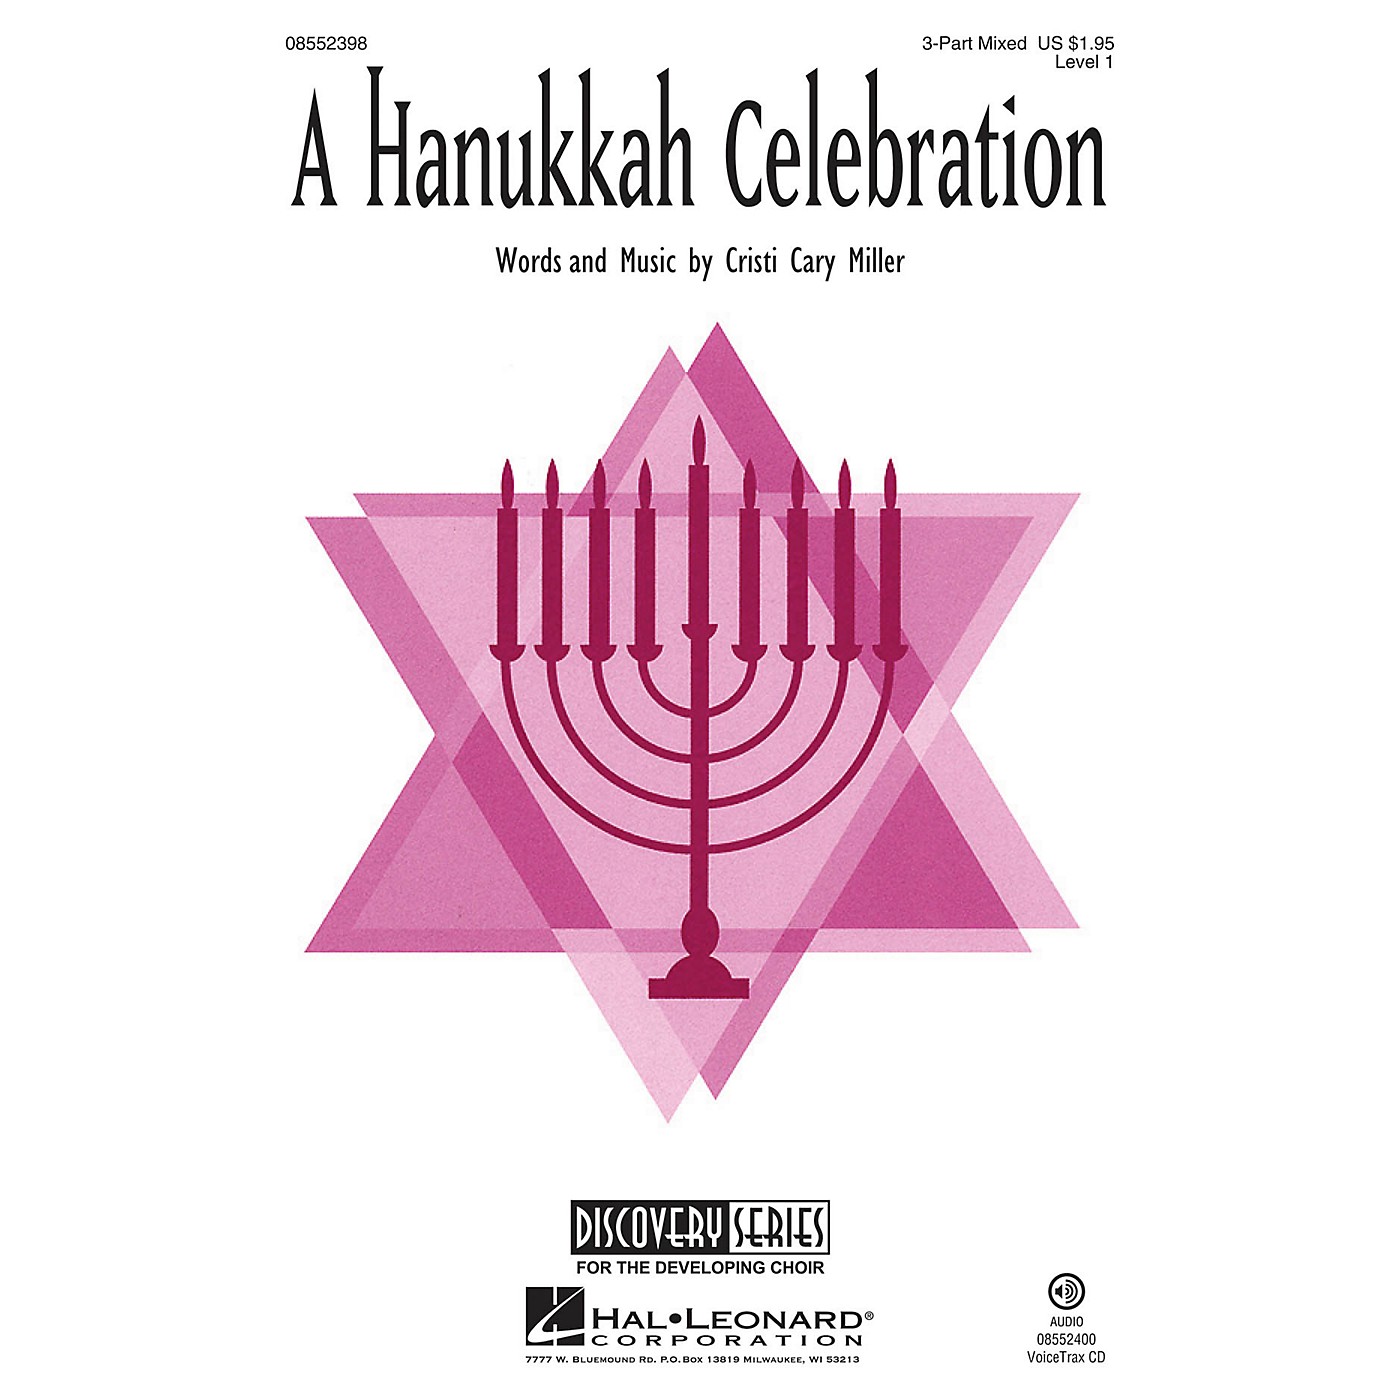 Hal Leonard A Hanukkah Celebration (Discovery Level 1) 3-Part Mixed composed by Cristi Cary Miller thumbnail